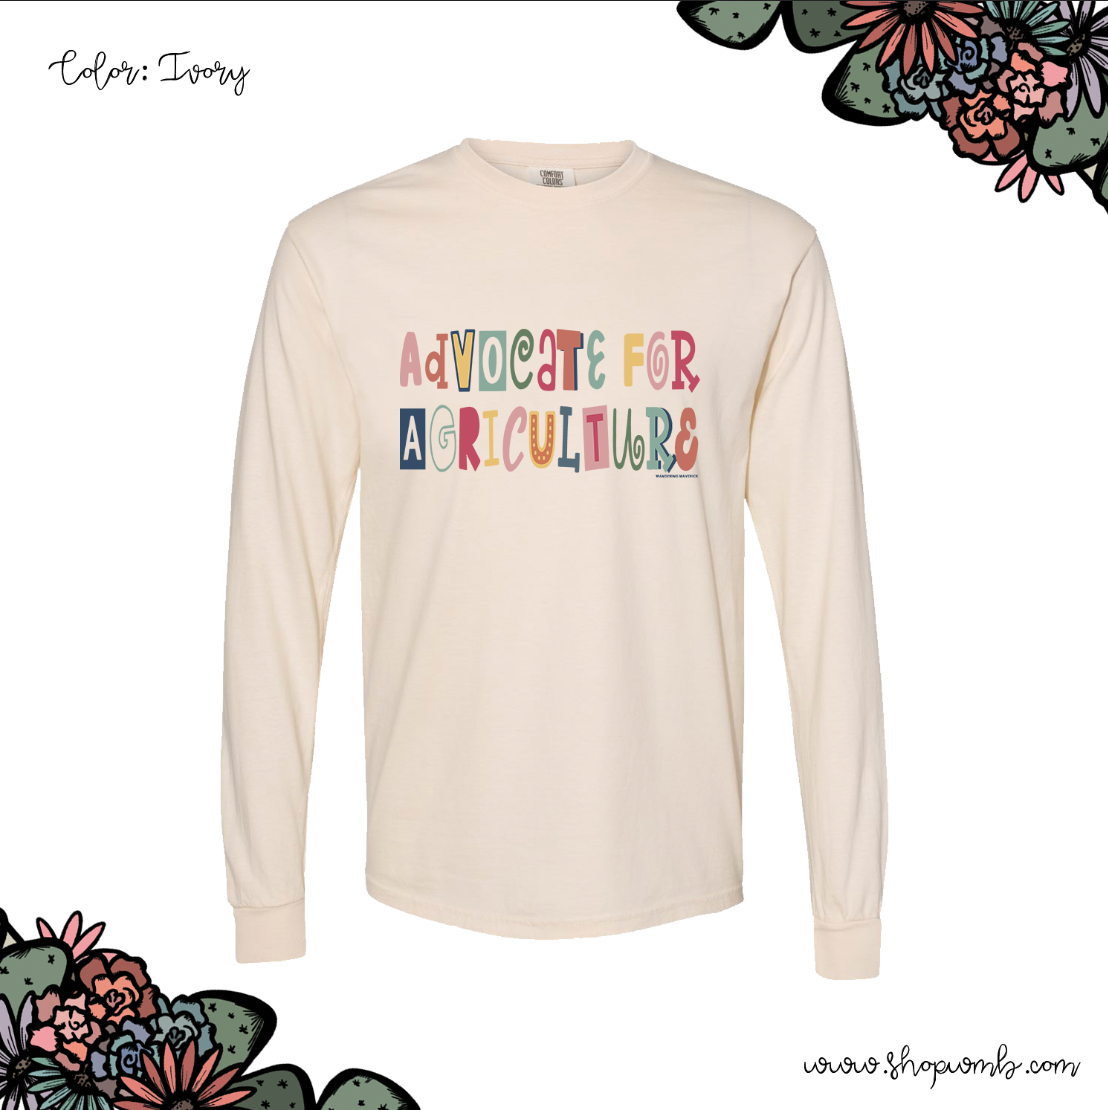 Magazine Advocate For Agriculture LONG SLEEVE T-Shirt (S-3XL) - Multiple Colors!